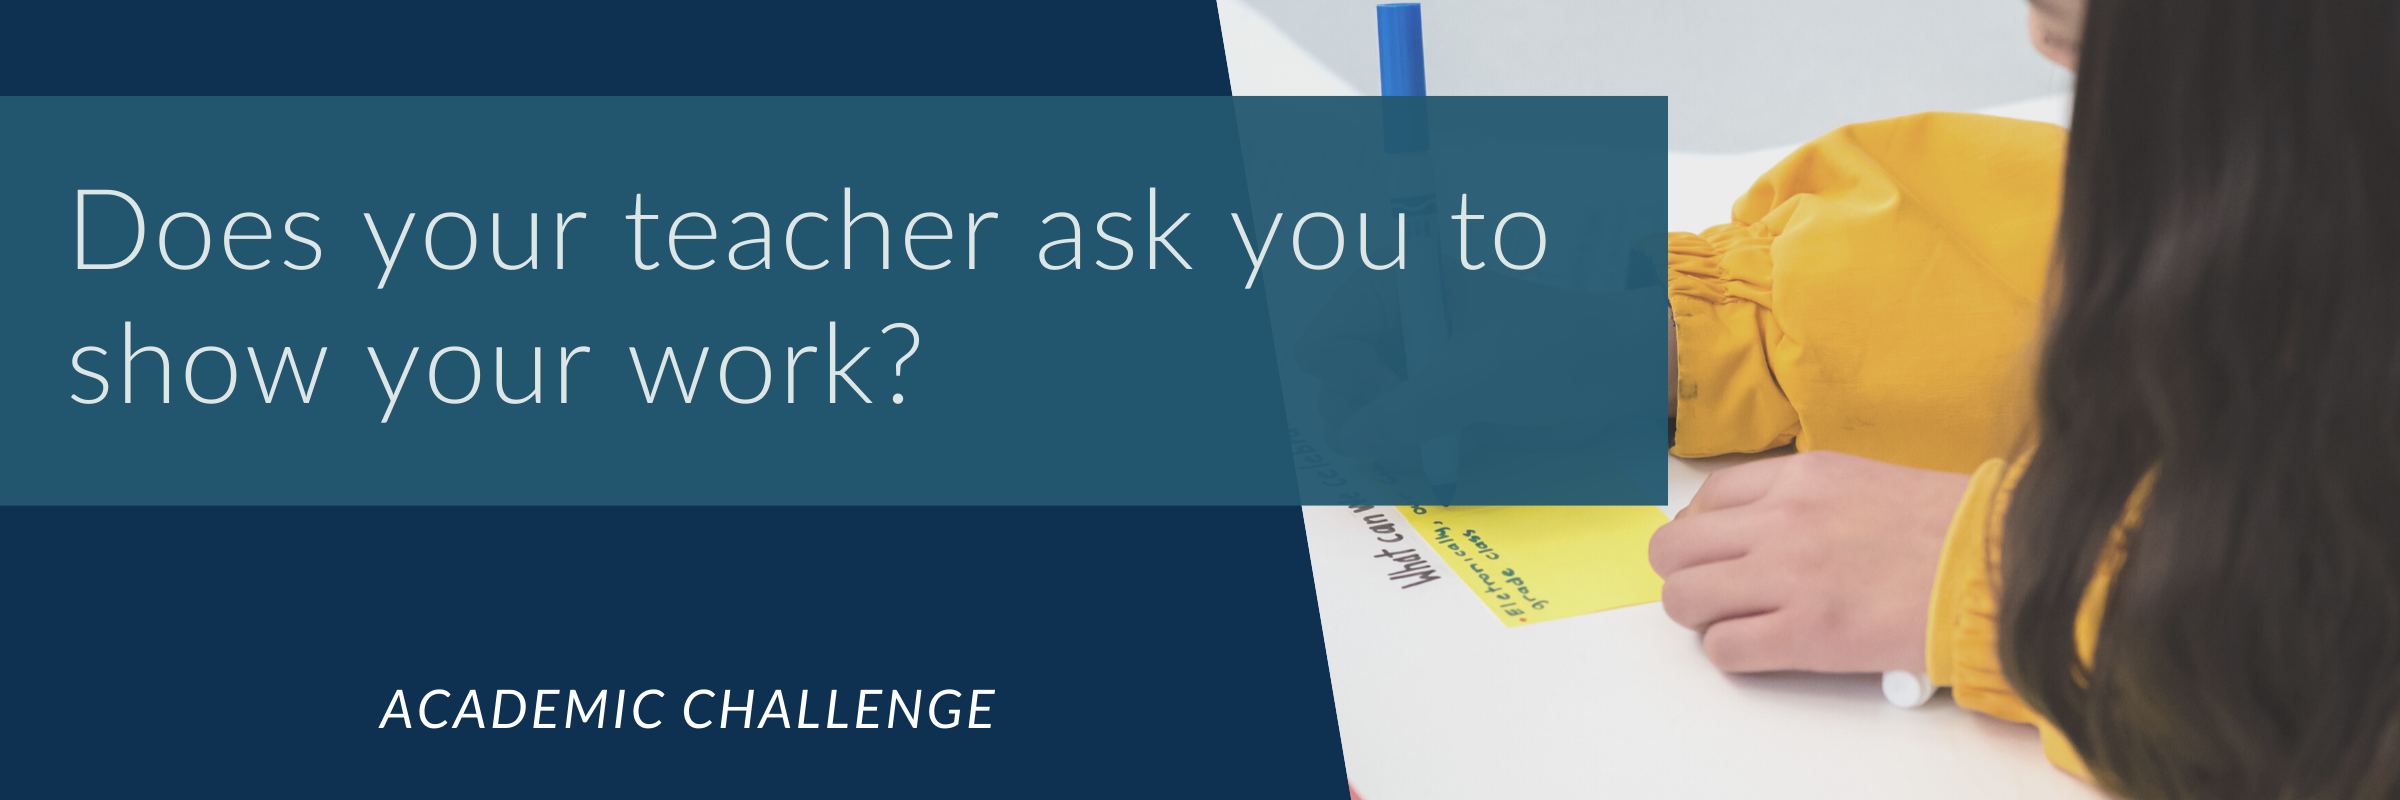 Does your teacher ask you to show your work?